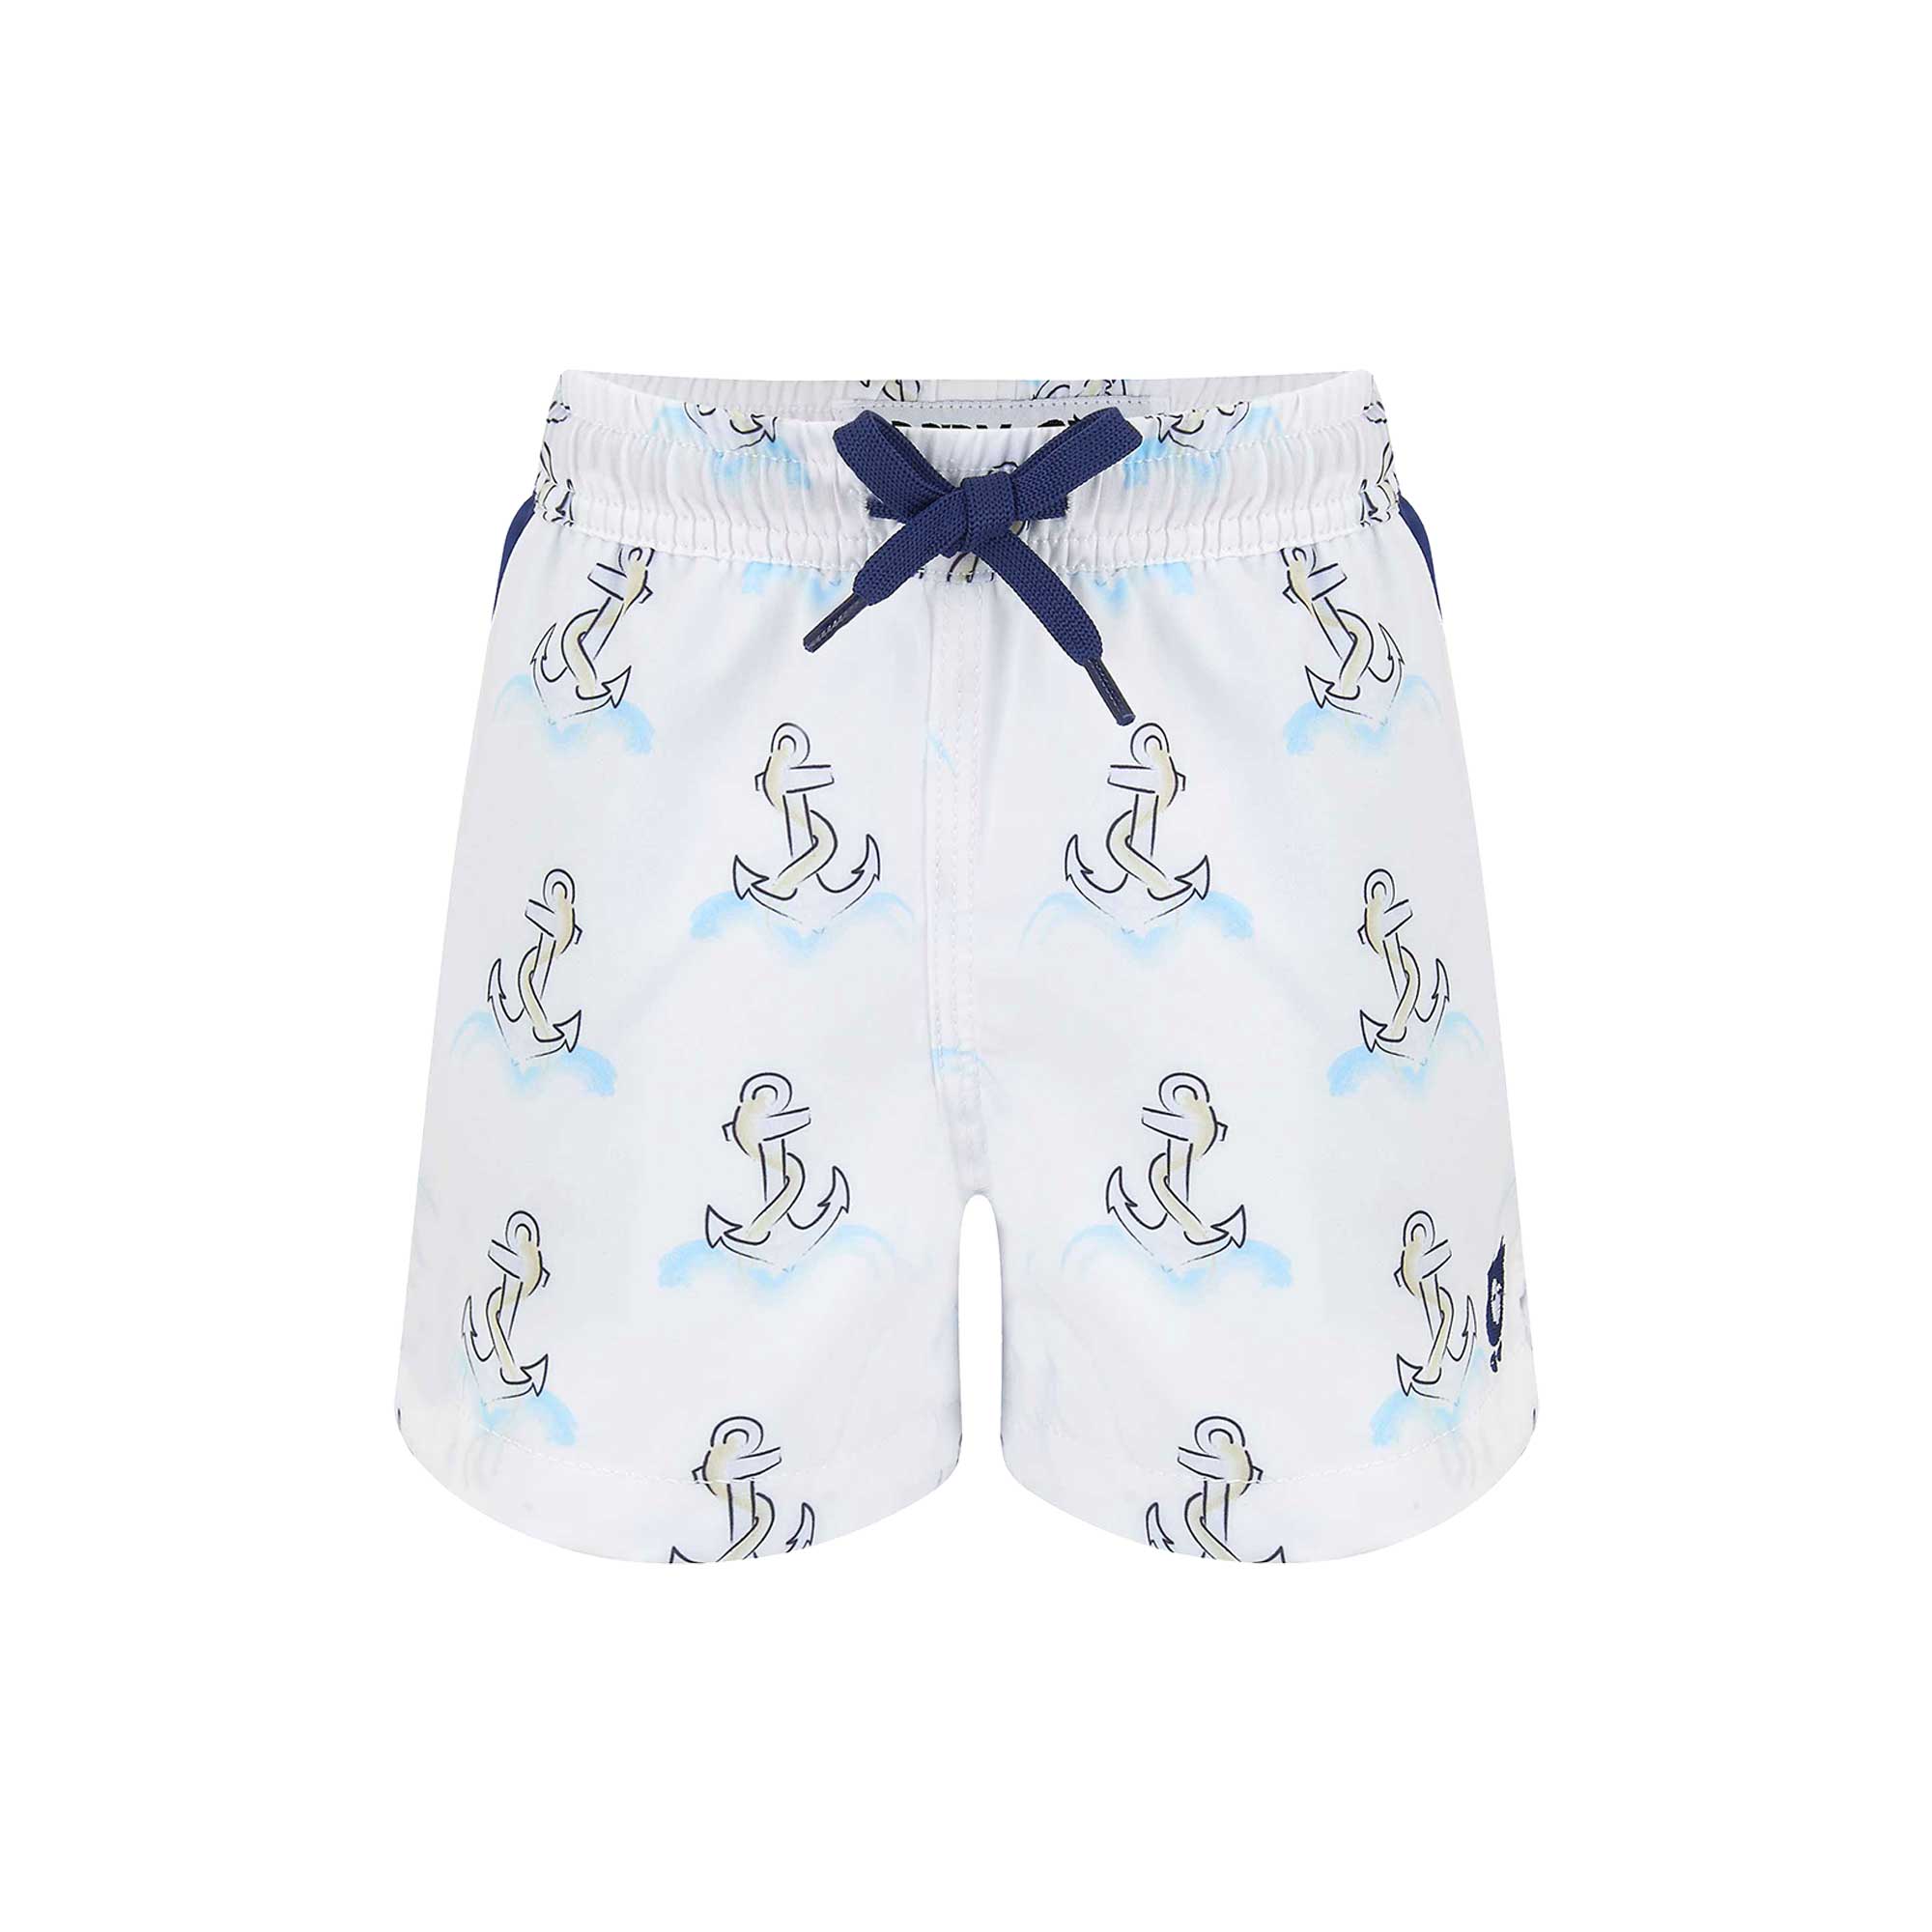 Matching Father & Son Anchor Swim Shorts with Waterproof Pocket